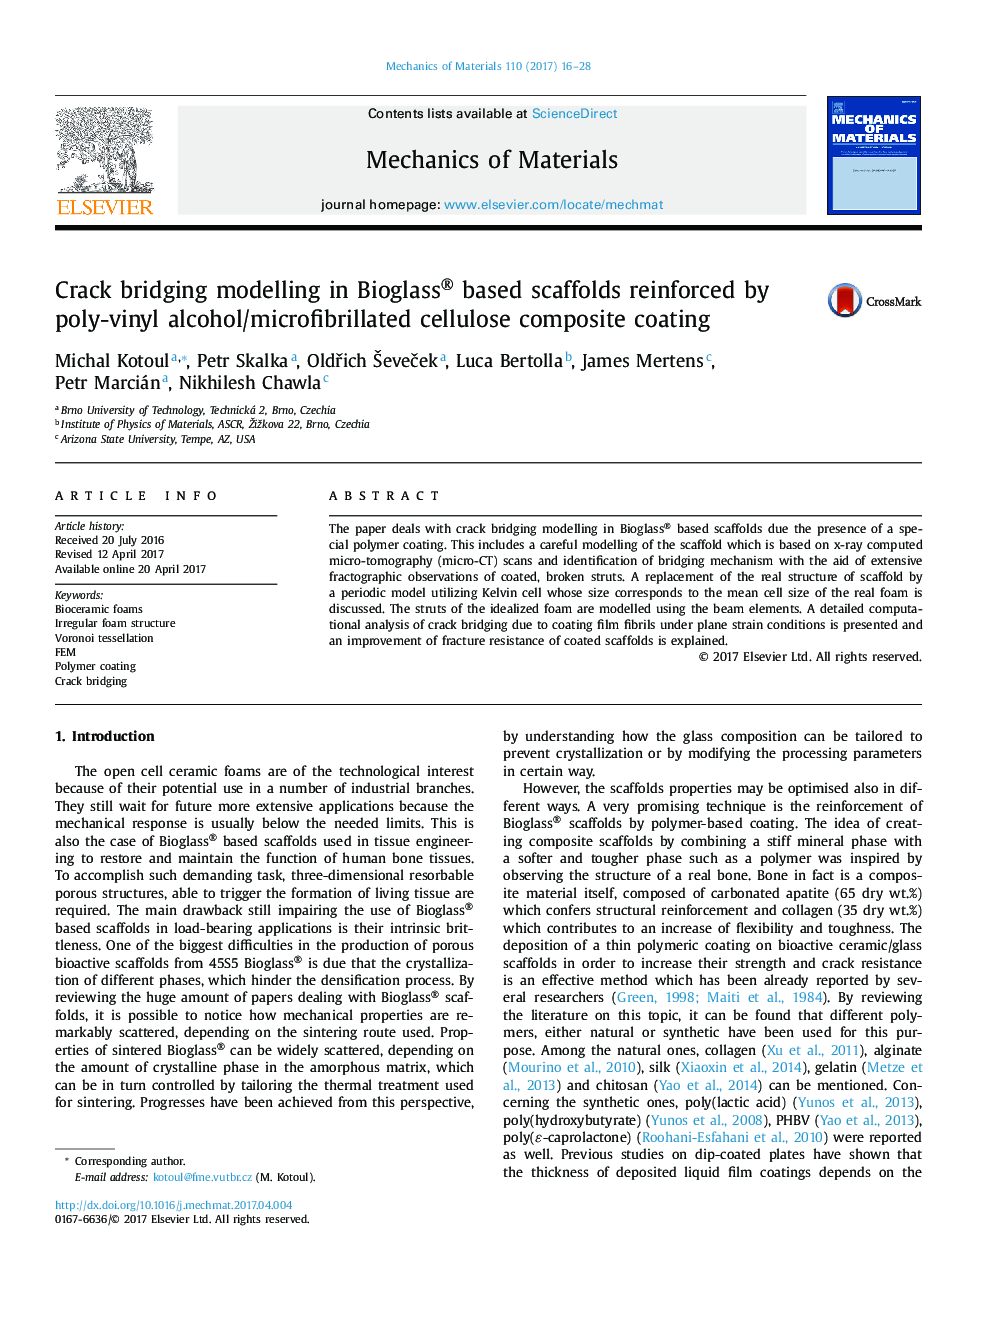 Crack bridging modelling in Bioglass® based scaffolds reinforced by poly-vinyl alcohol/microfibrillated cellulose composite coating